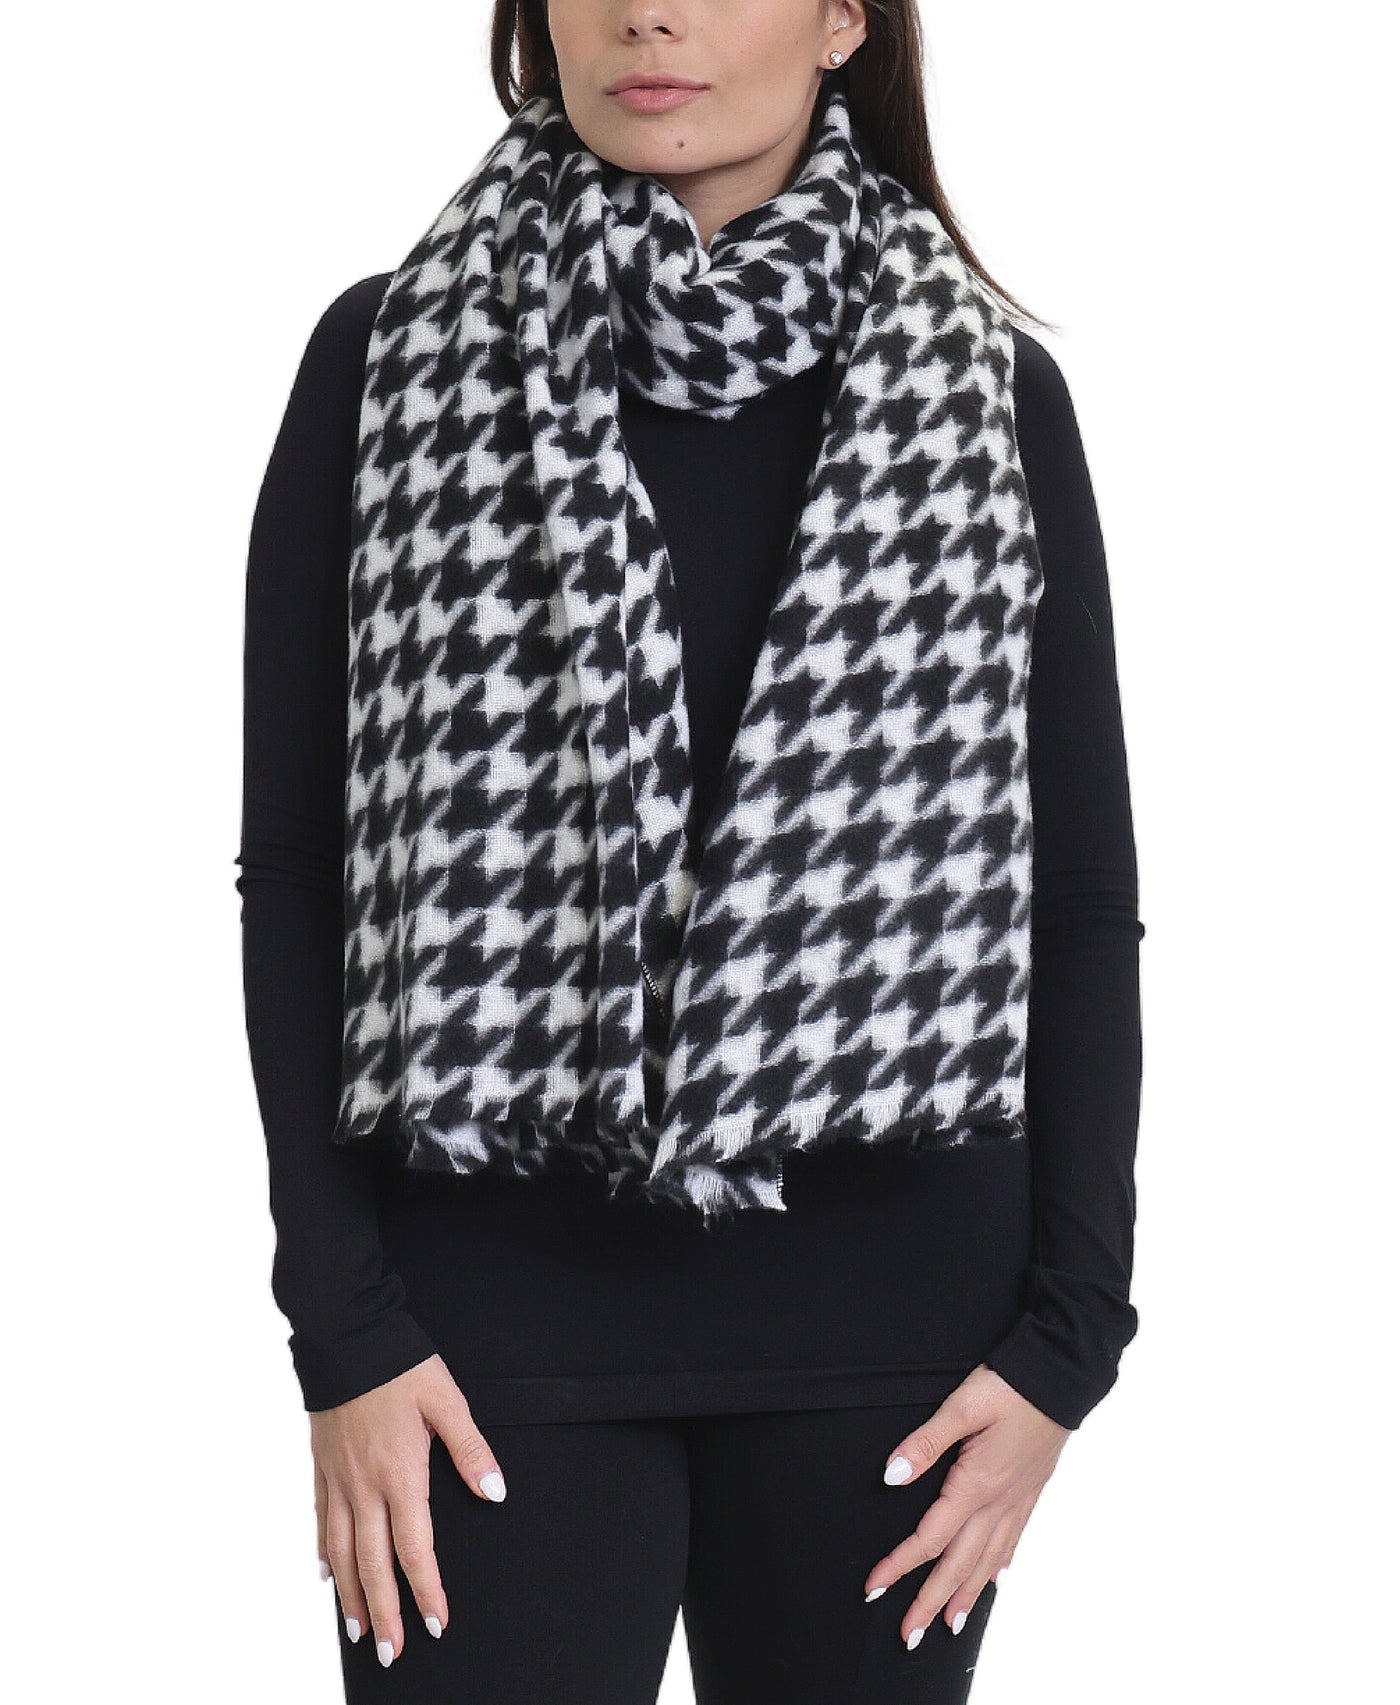 Houndstooth Print Scarf/Wrap image 1